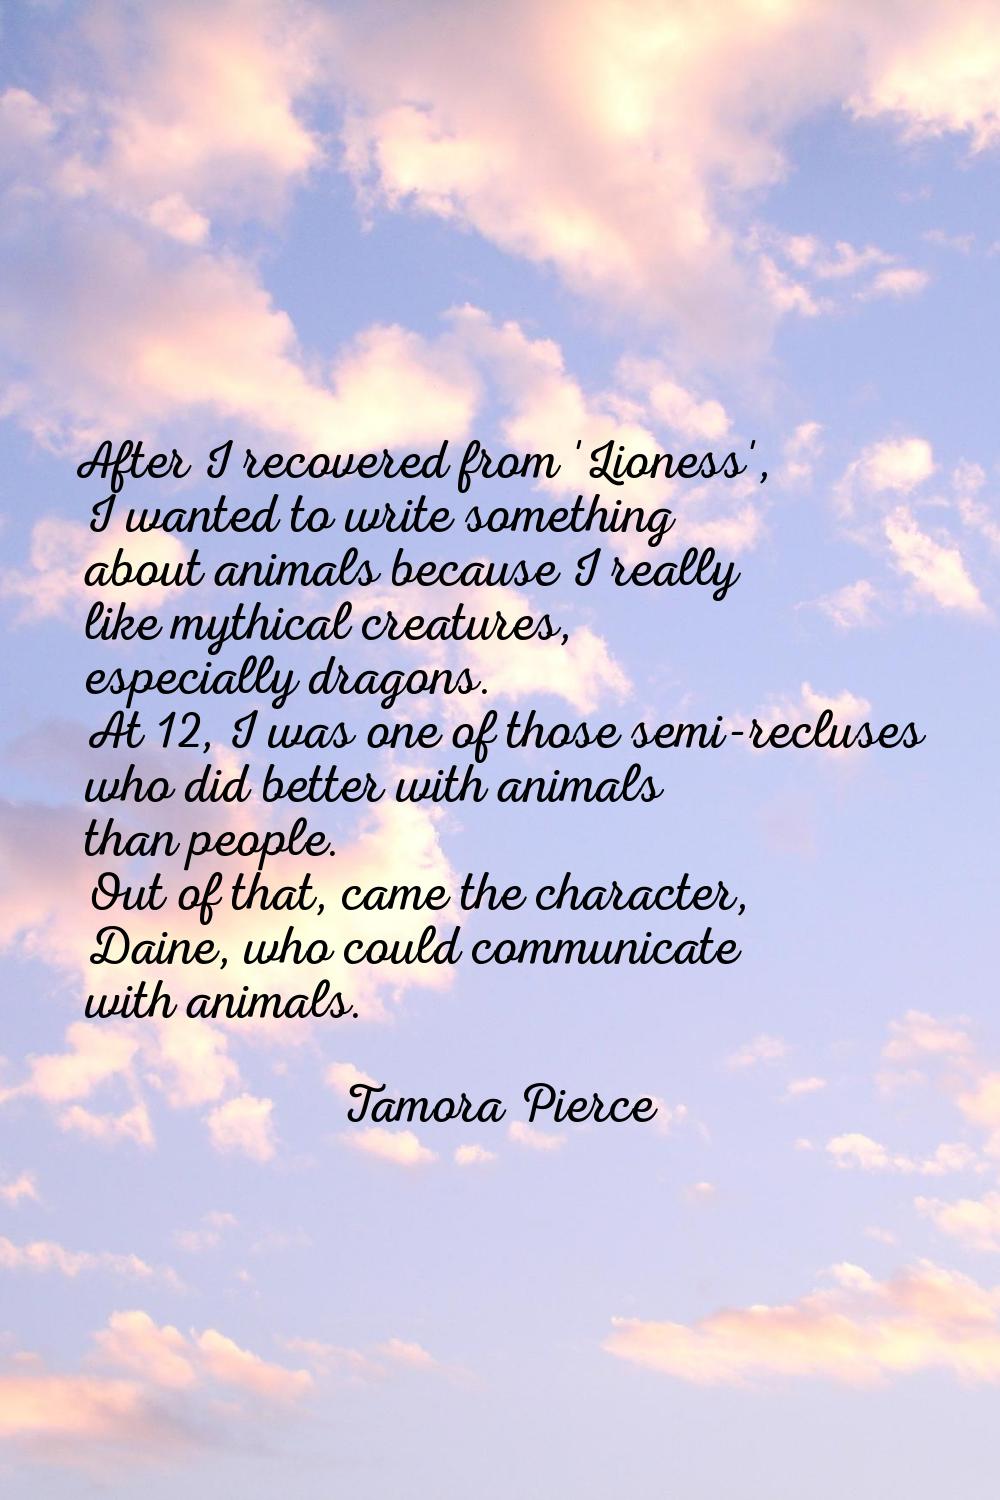 After I recovered from 'Lioness', I wanted to write something about animals because I really like m